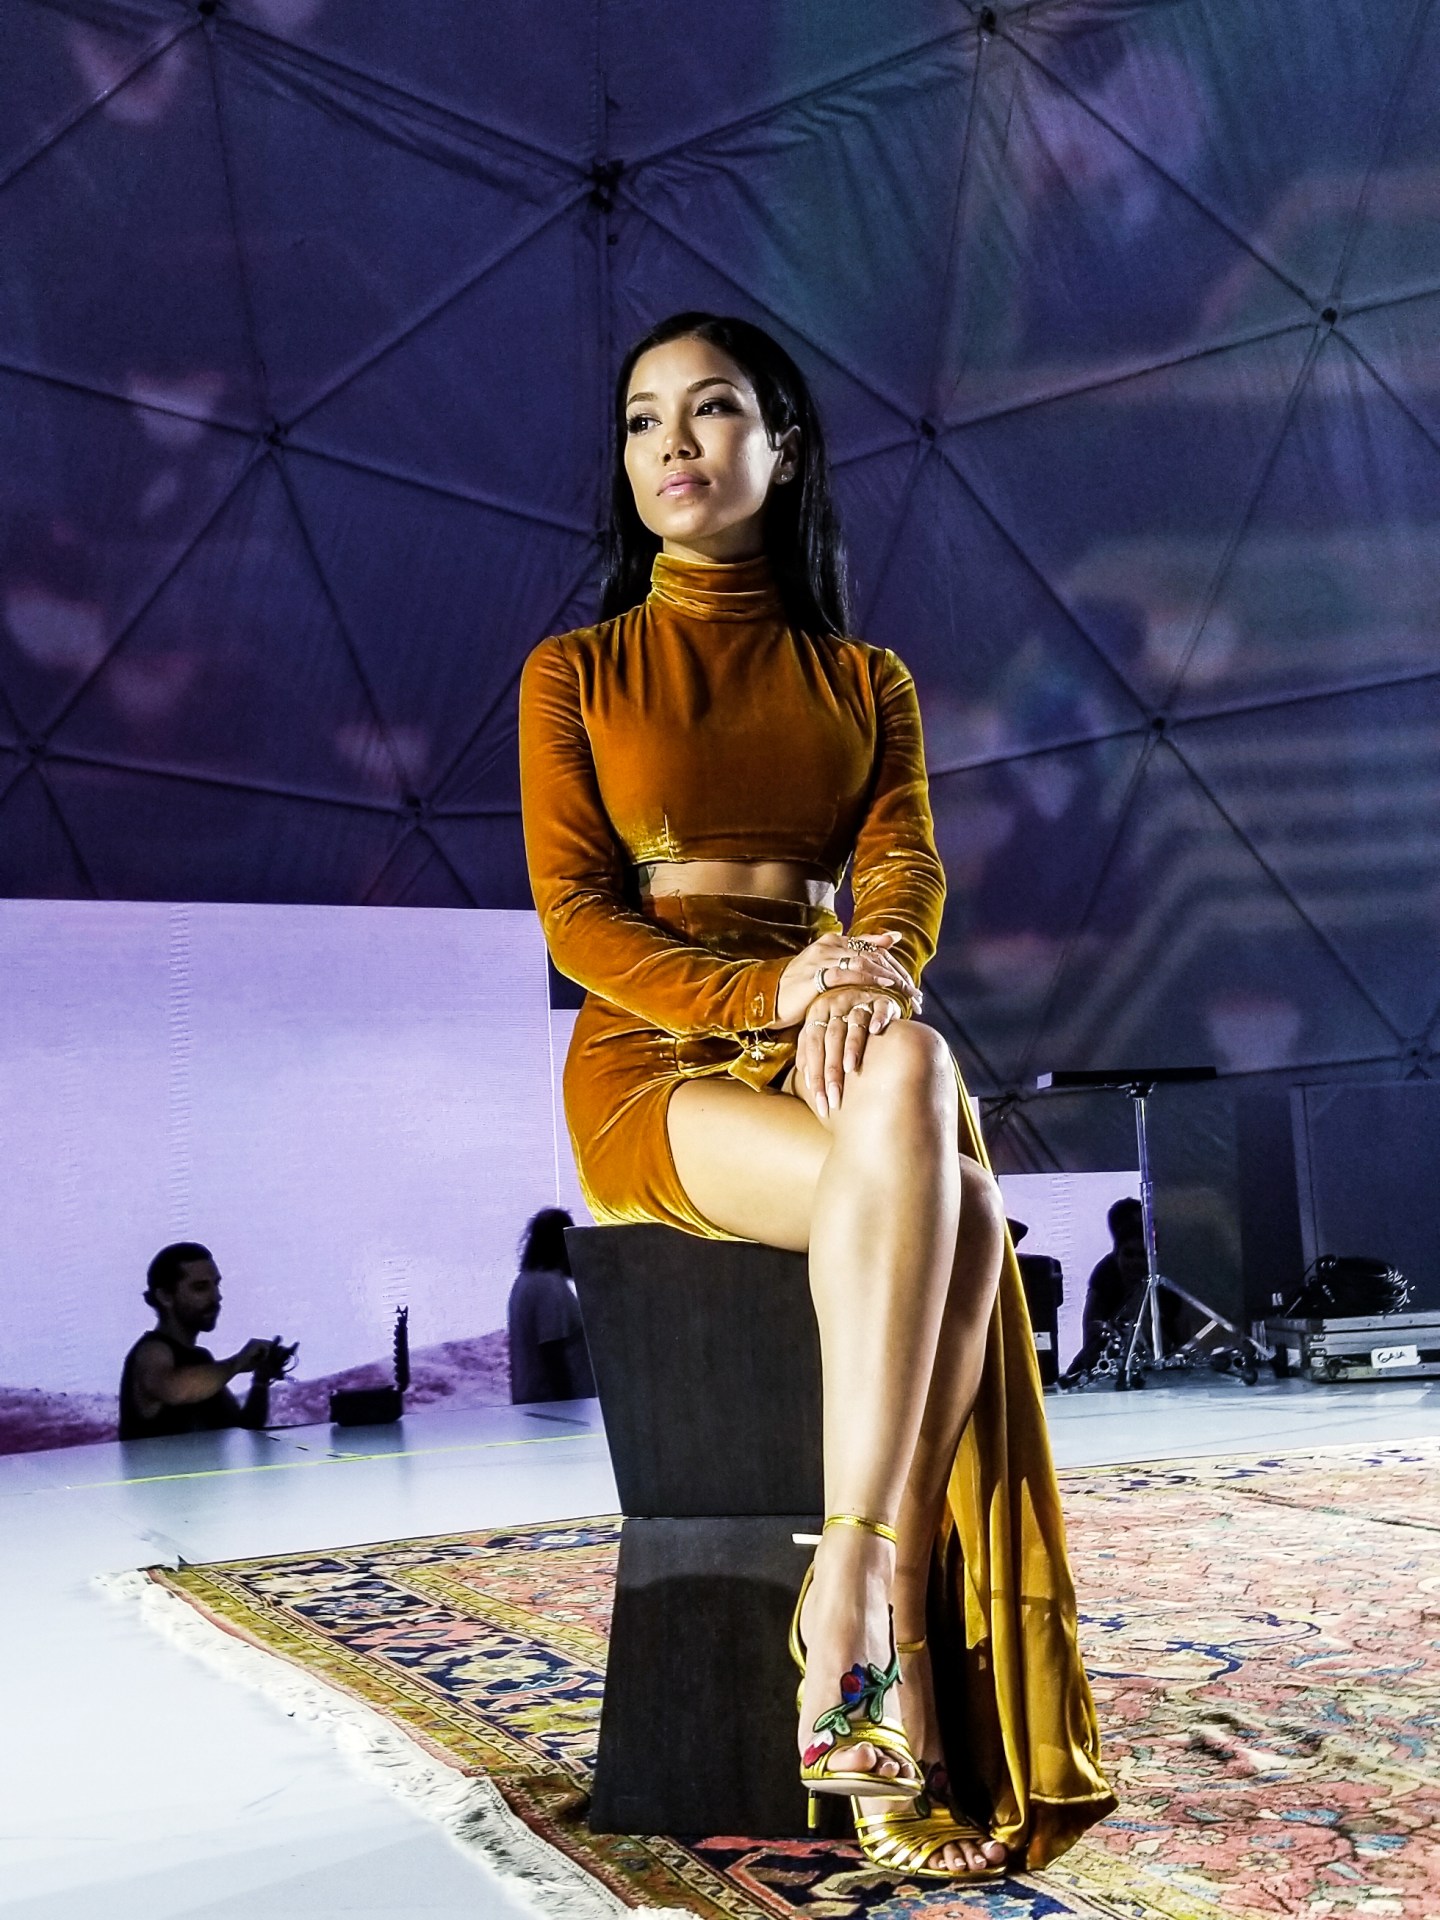 Jhené Aiko’s Art Basel exhibition showed why she was unstoppable this year